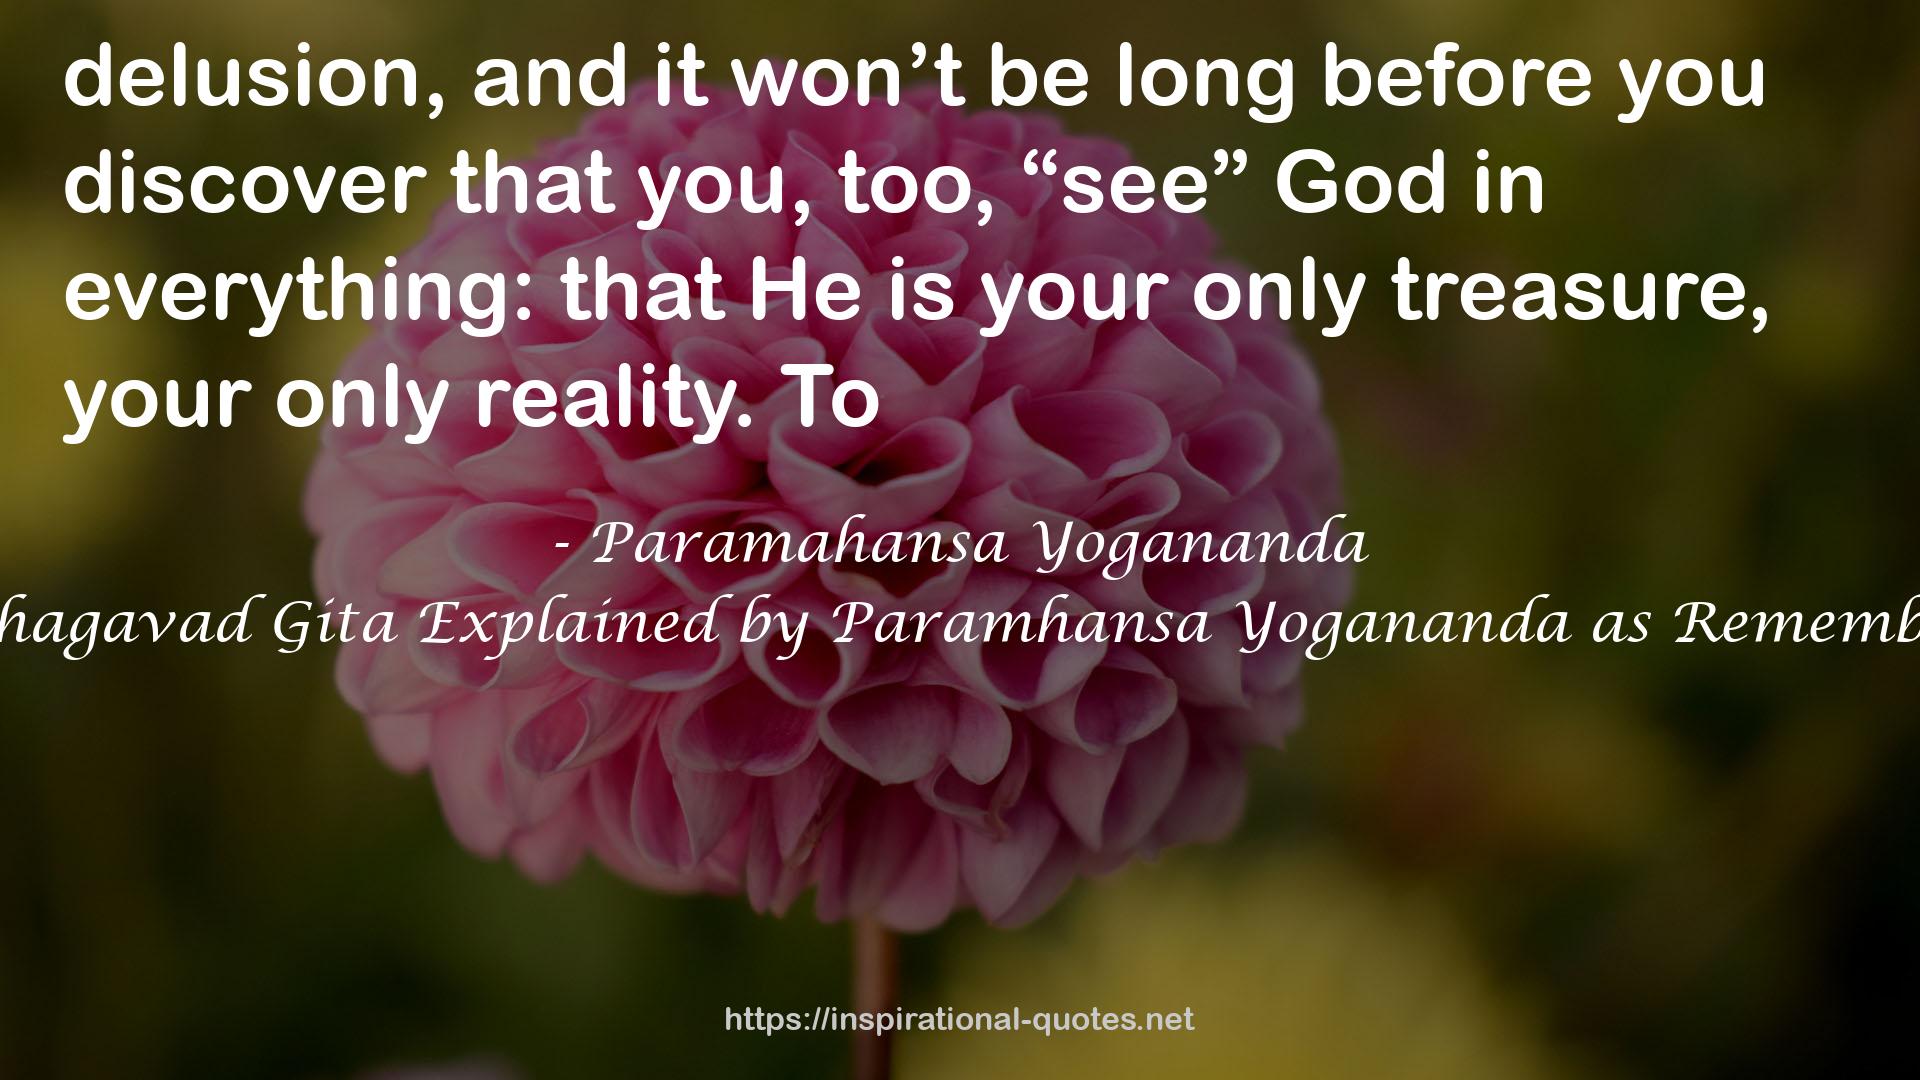 The Essence of the Bhagavad Gita Explained by Paramhansa Yogananda as Remembered by His Disciple QUOTES